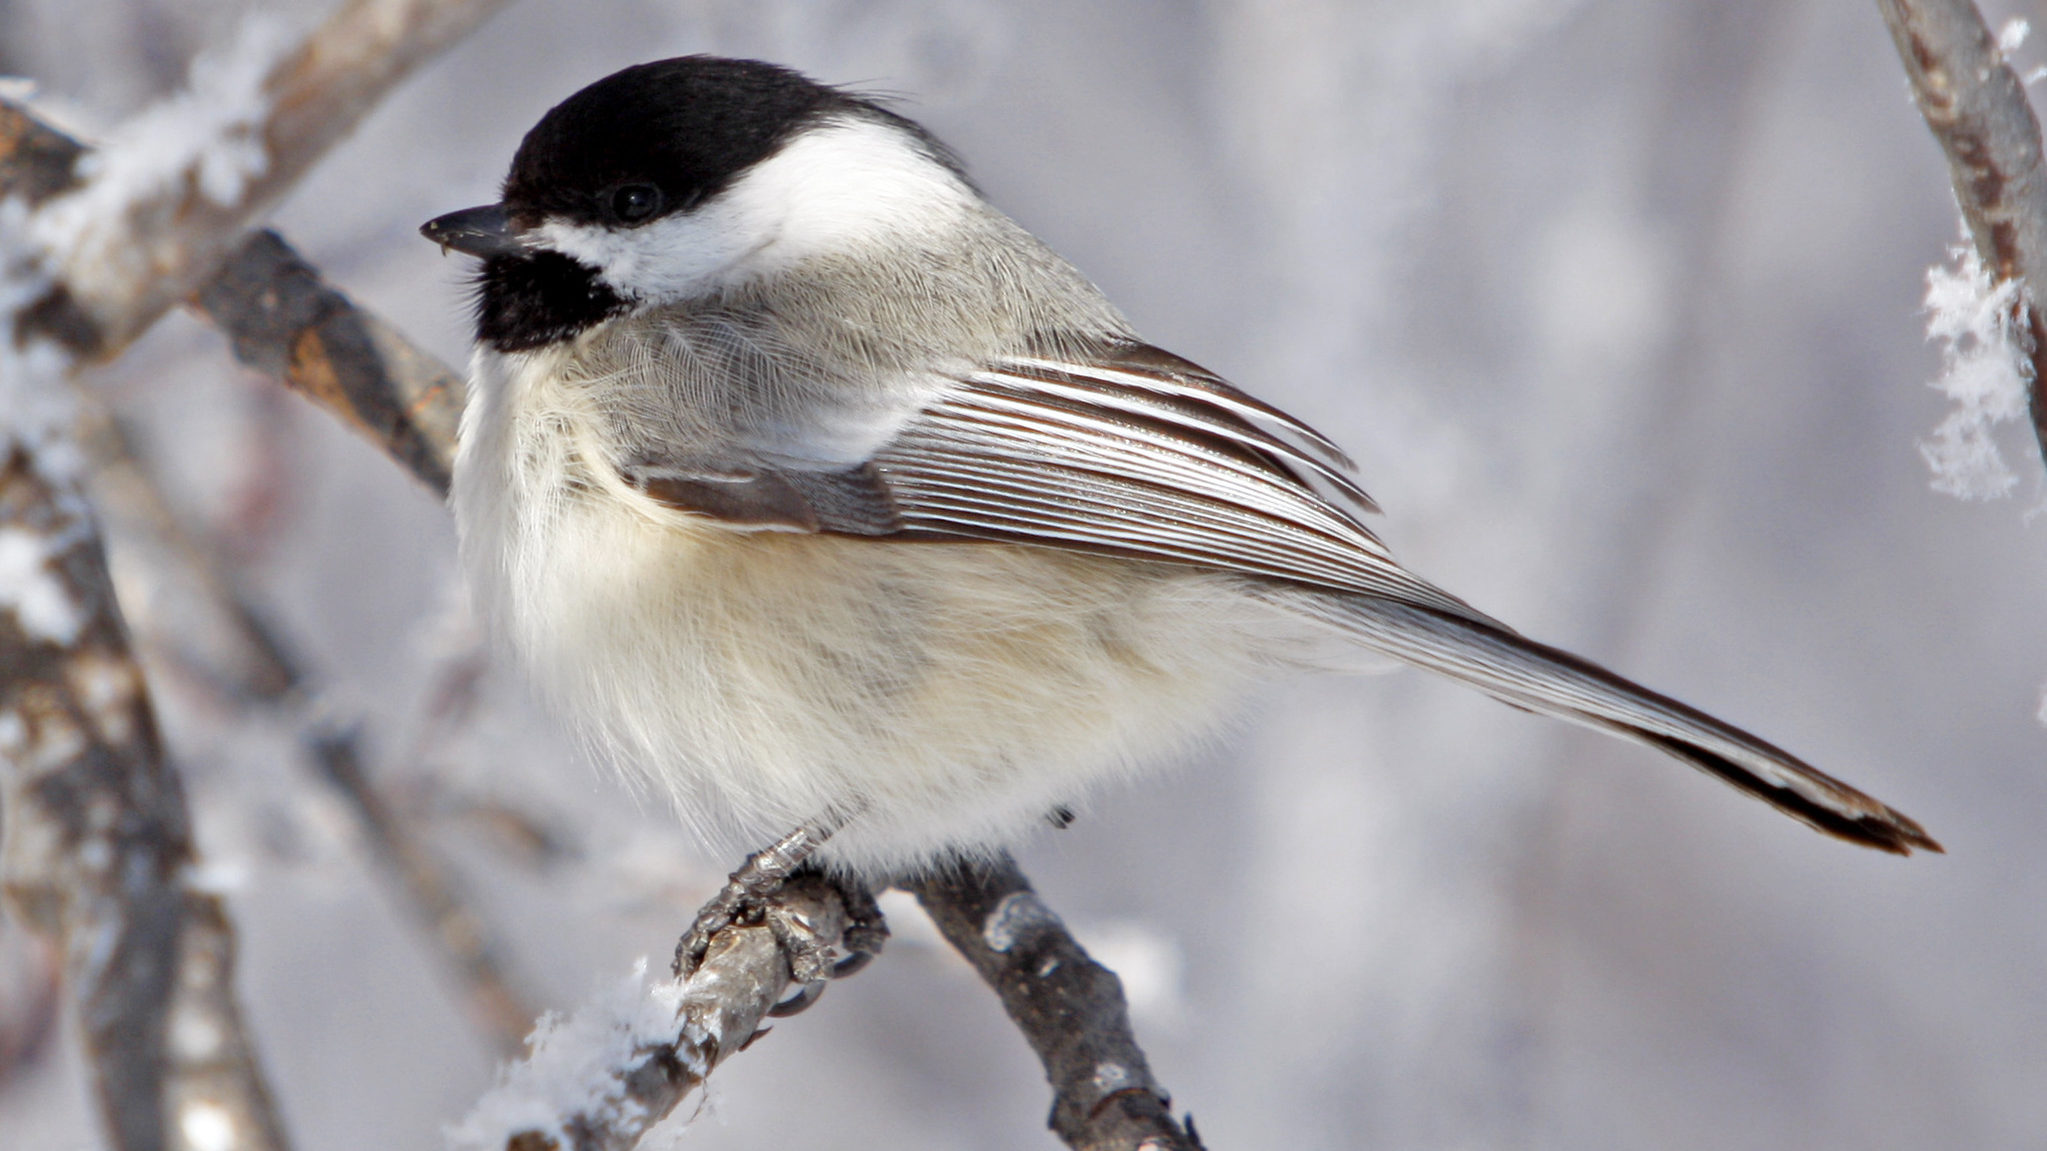 An eastern chickadee perched on a snowy branch